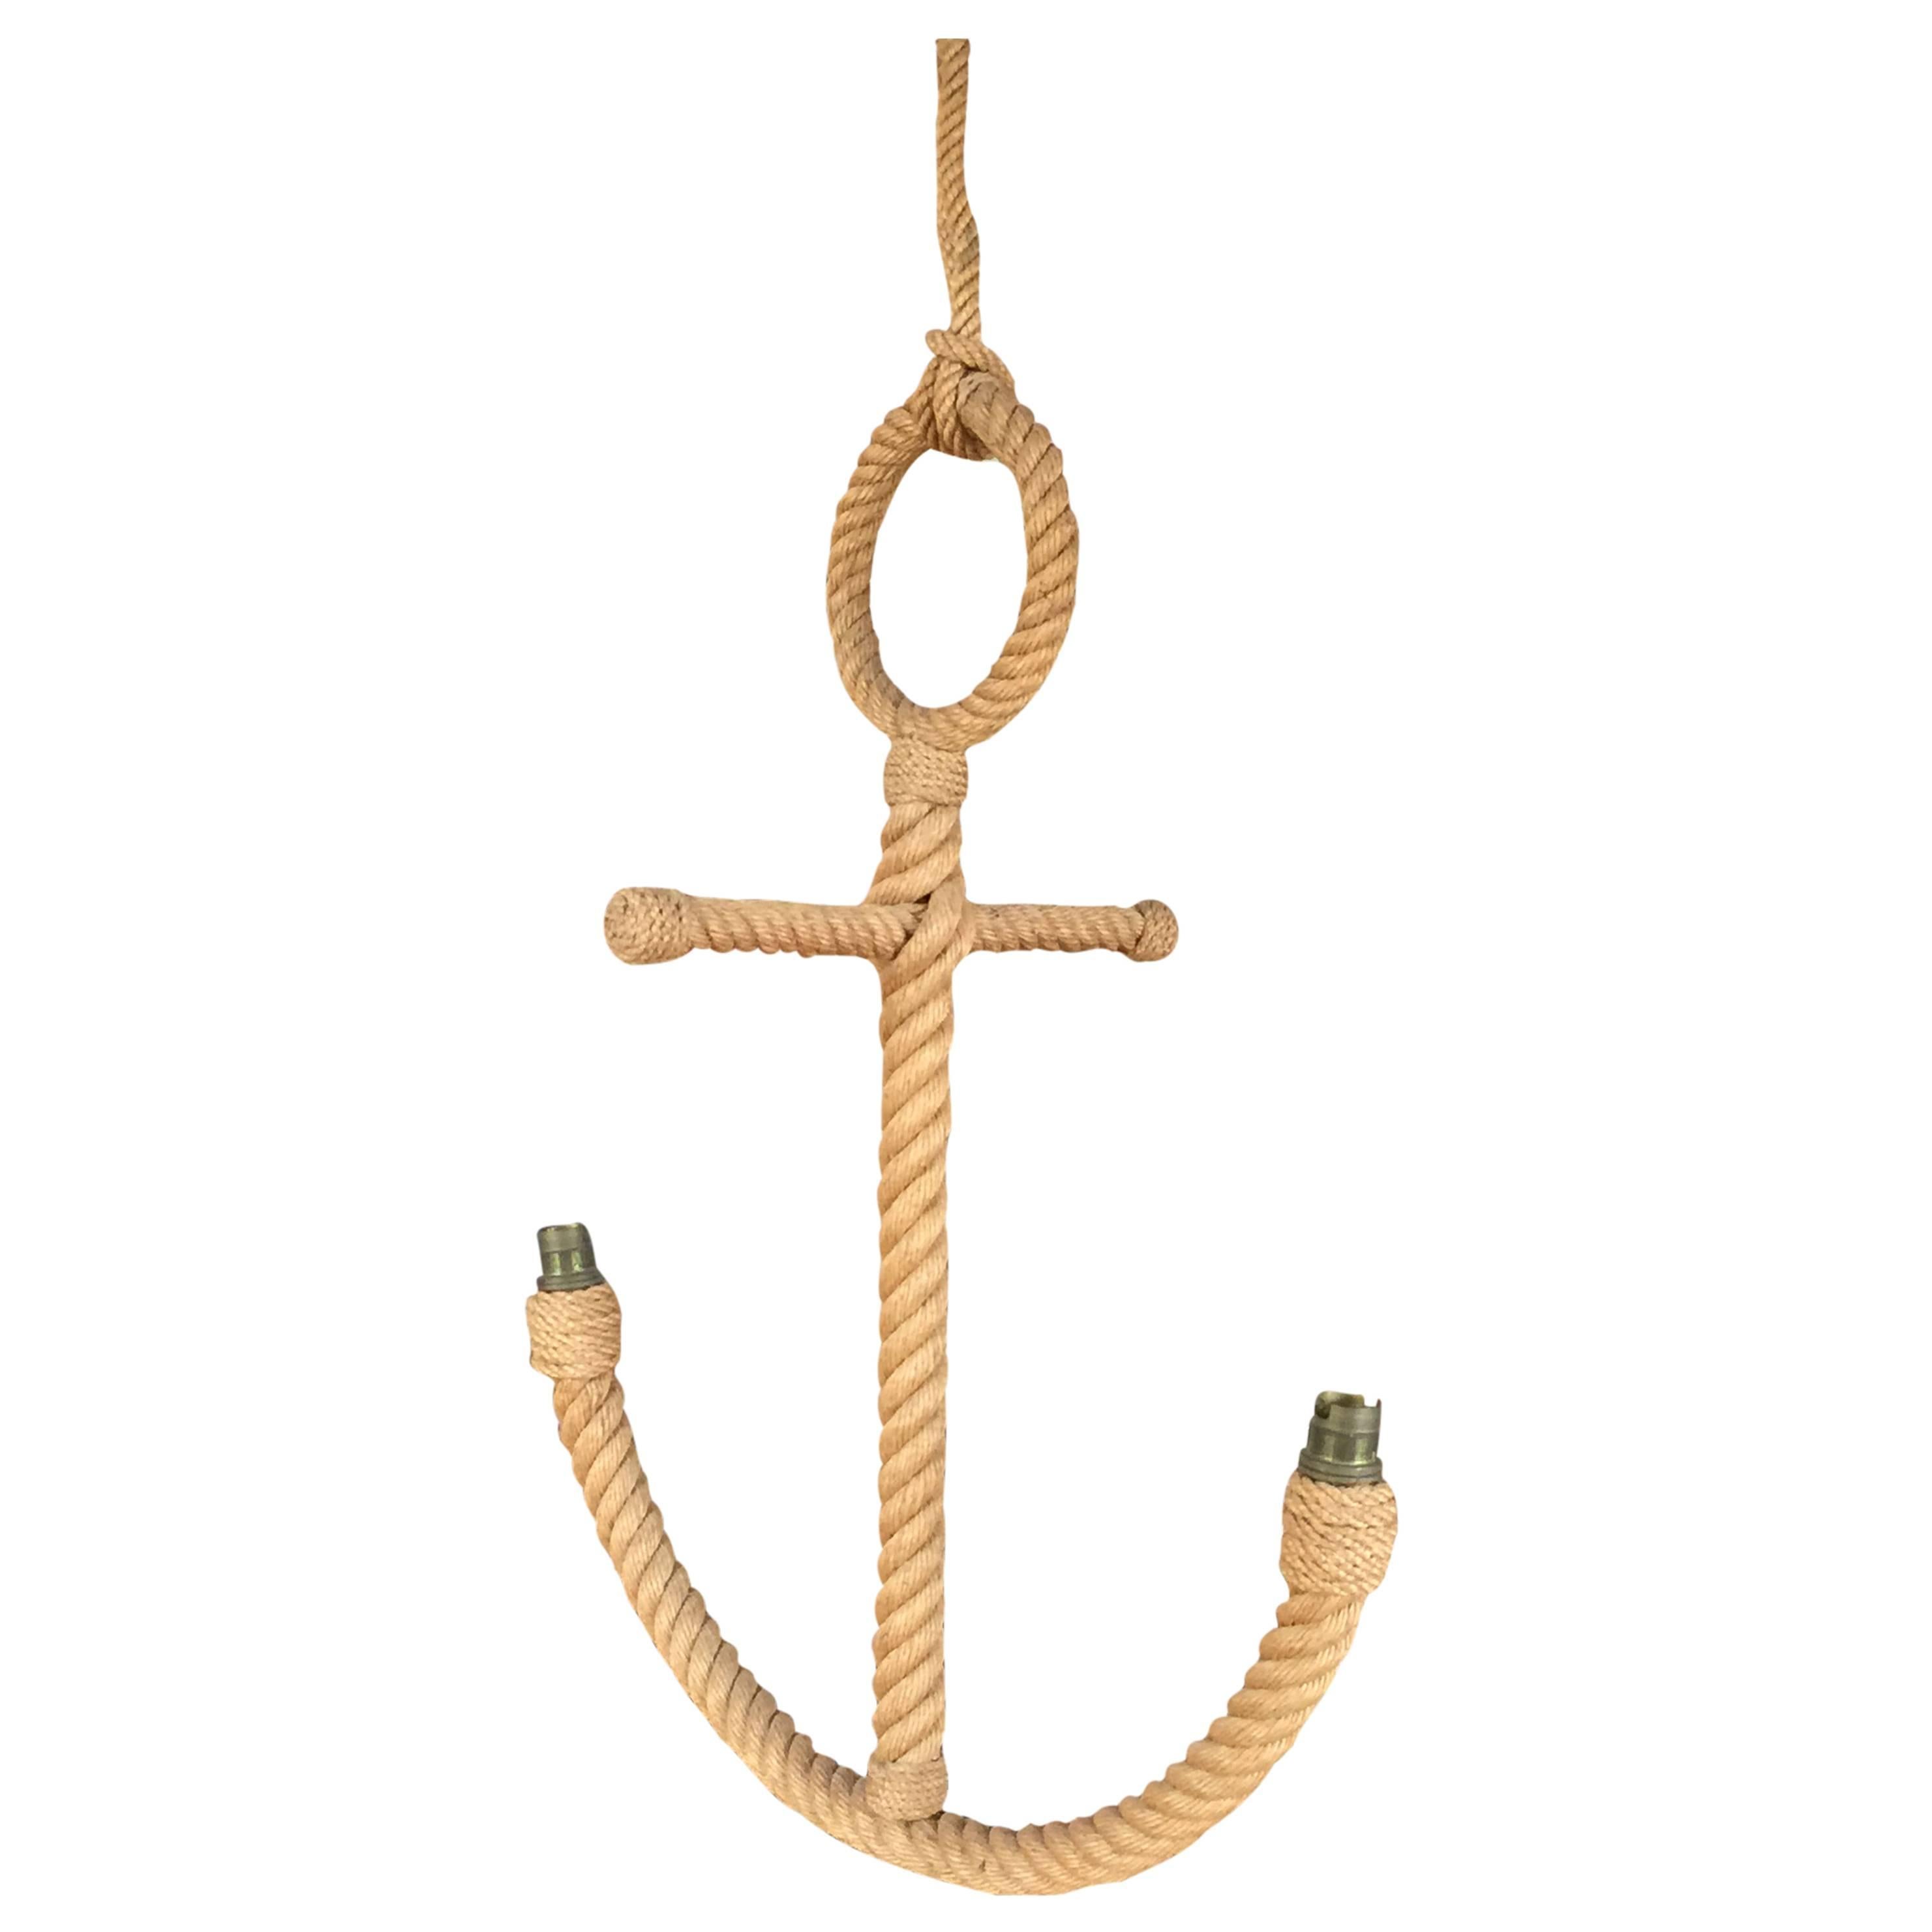 Rare Anchor Shaped Rope Chandelier by Audoux Minet, France, 1960s